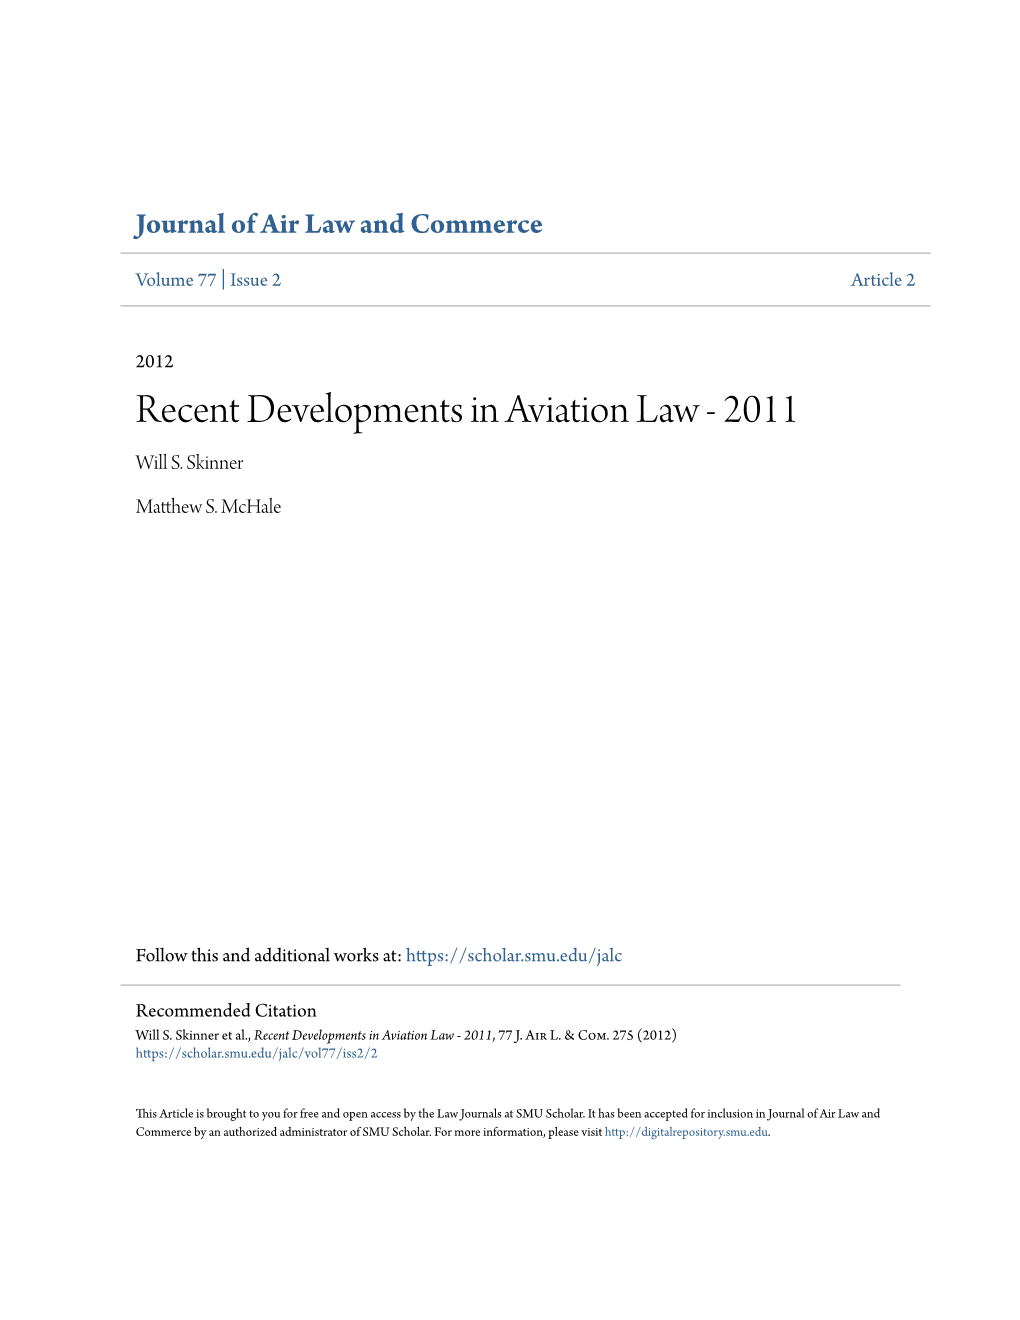 Recent Developments in Aviation Law - 2011 Will S